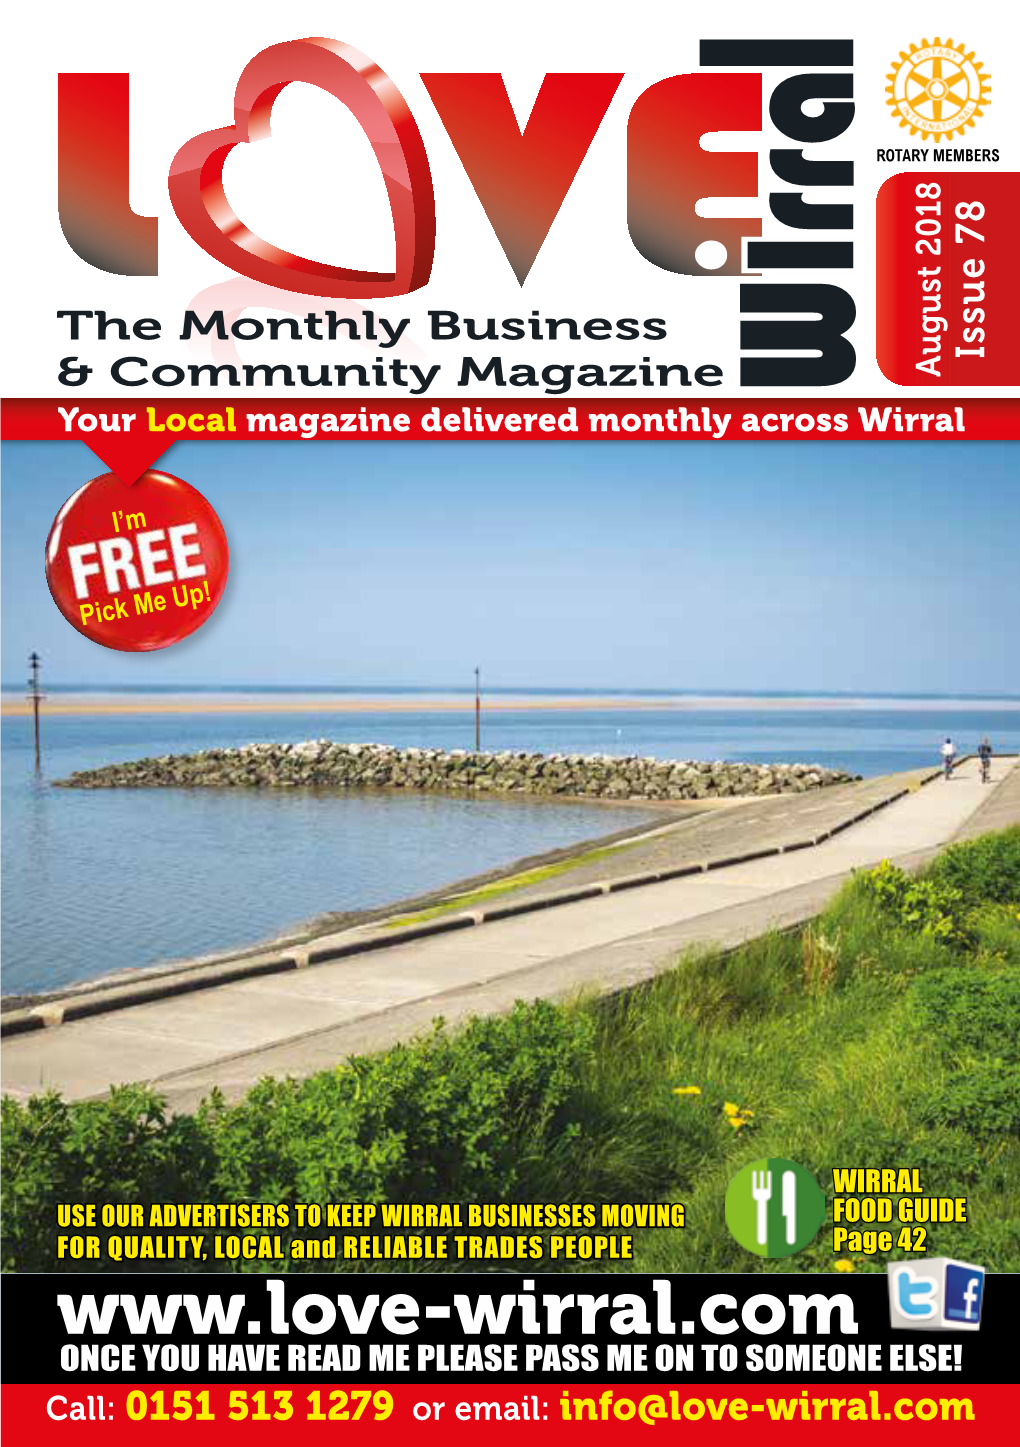 August 2018 August 2018 Your Local Magazine Delivered Monthly Across Wirral